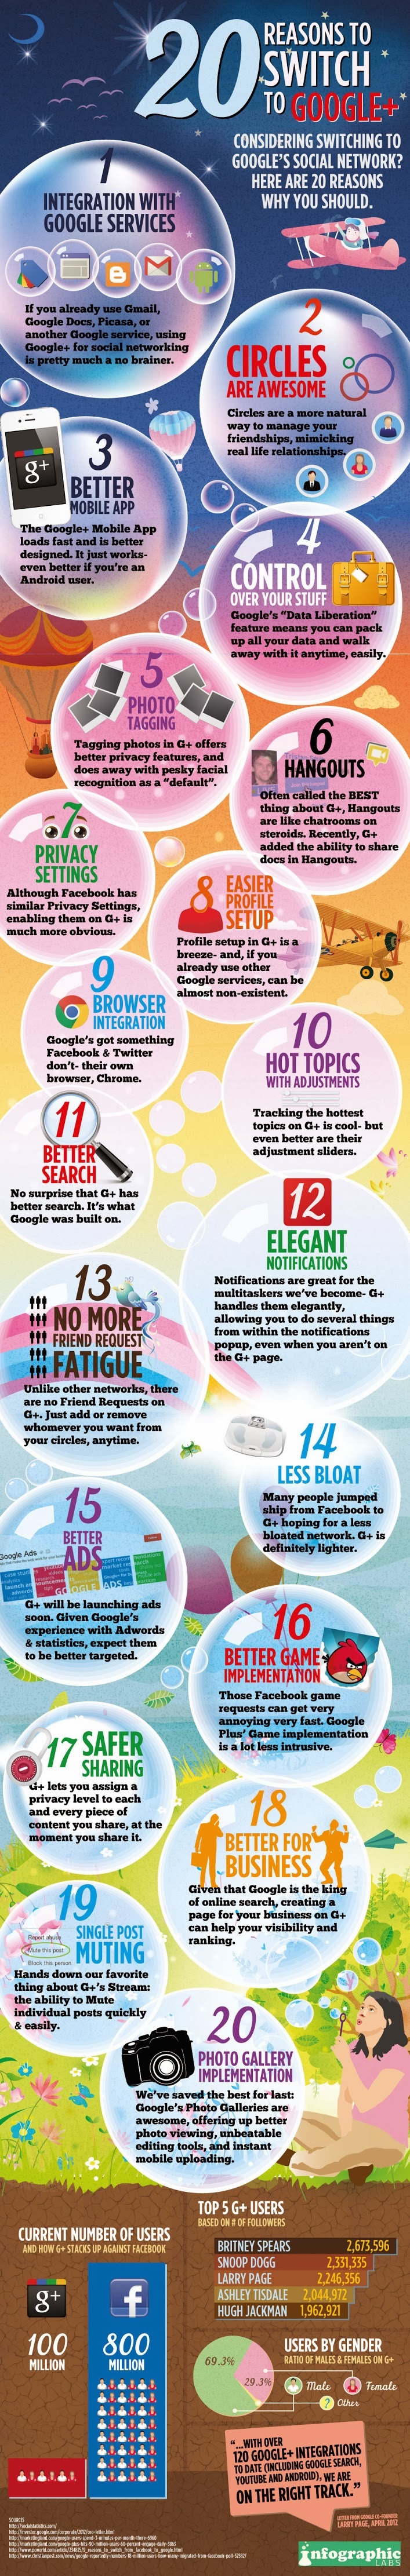 Best Reasons To Switch To Google Plus +